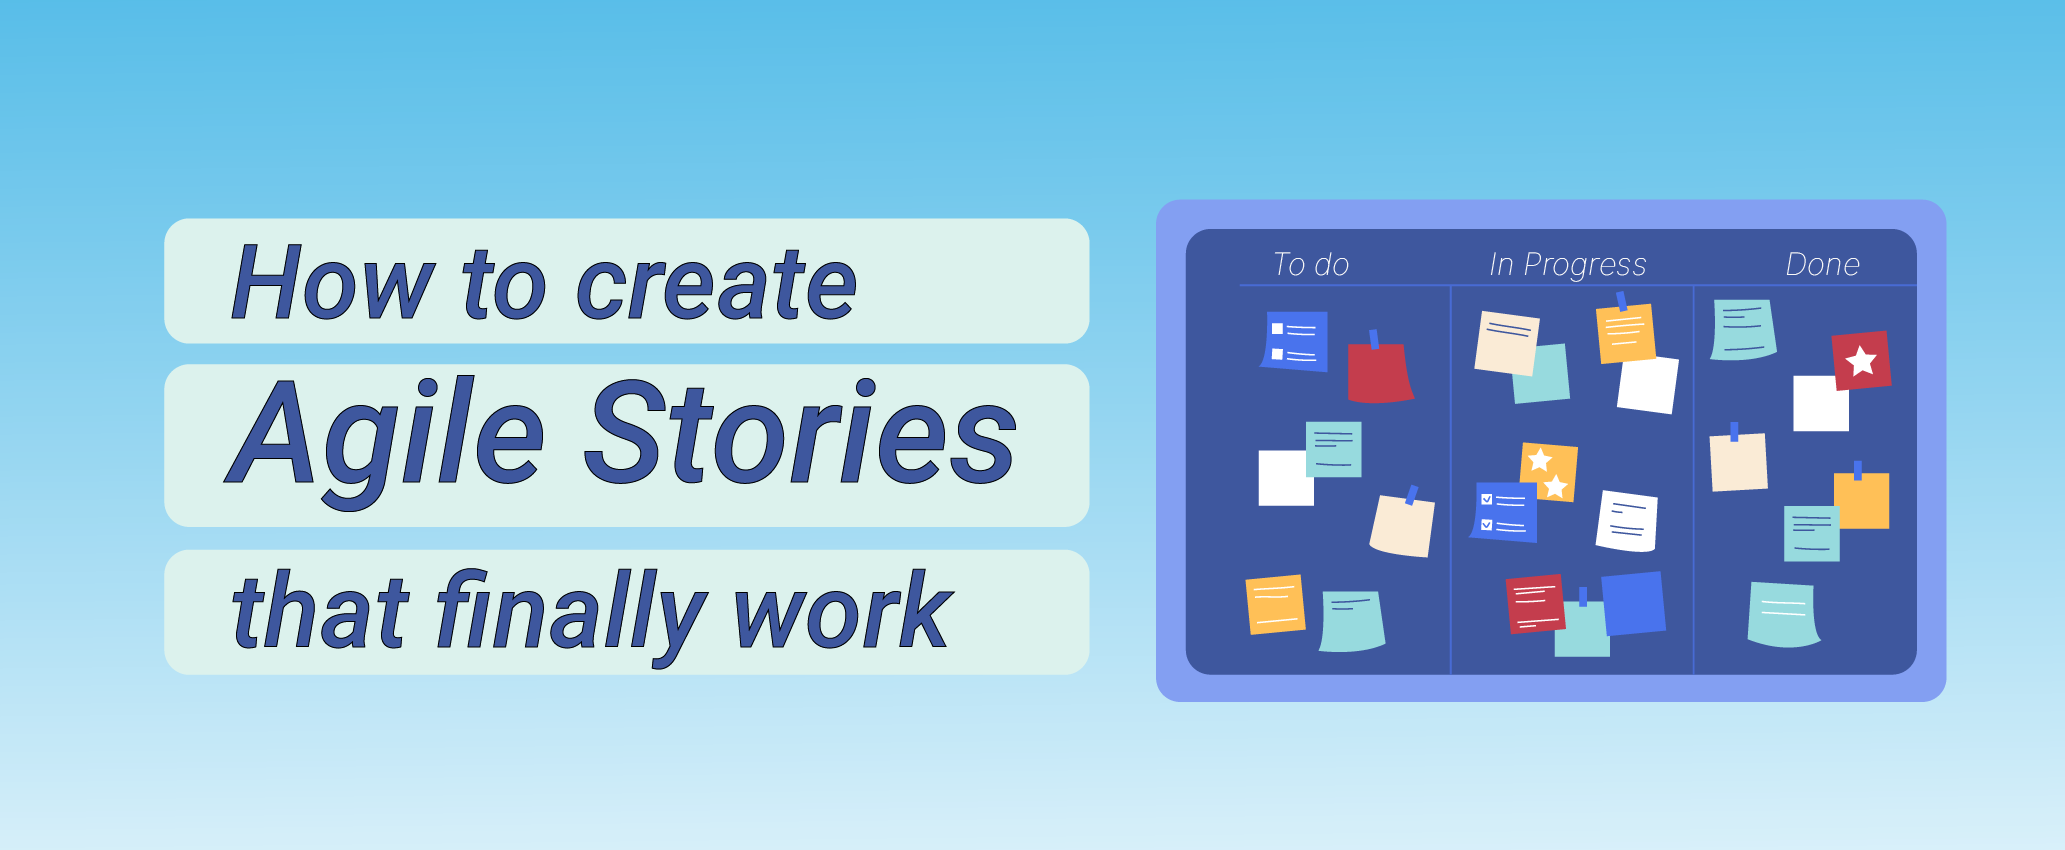 How to Create Agile Stories that finally work